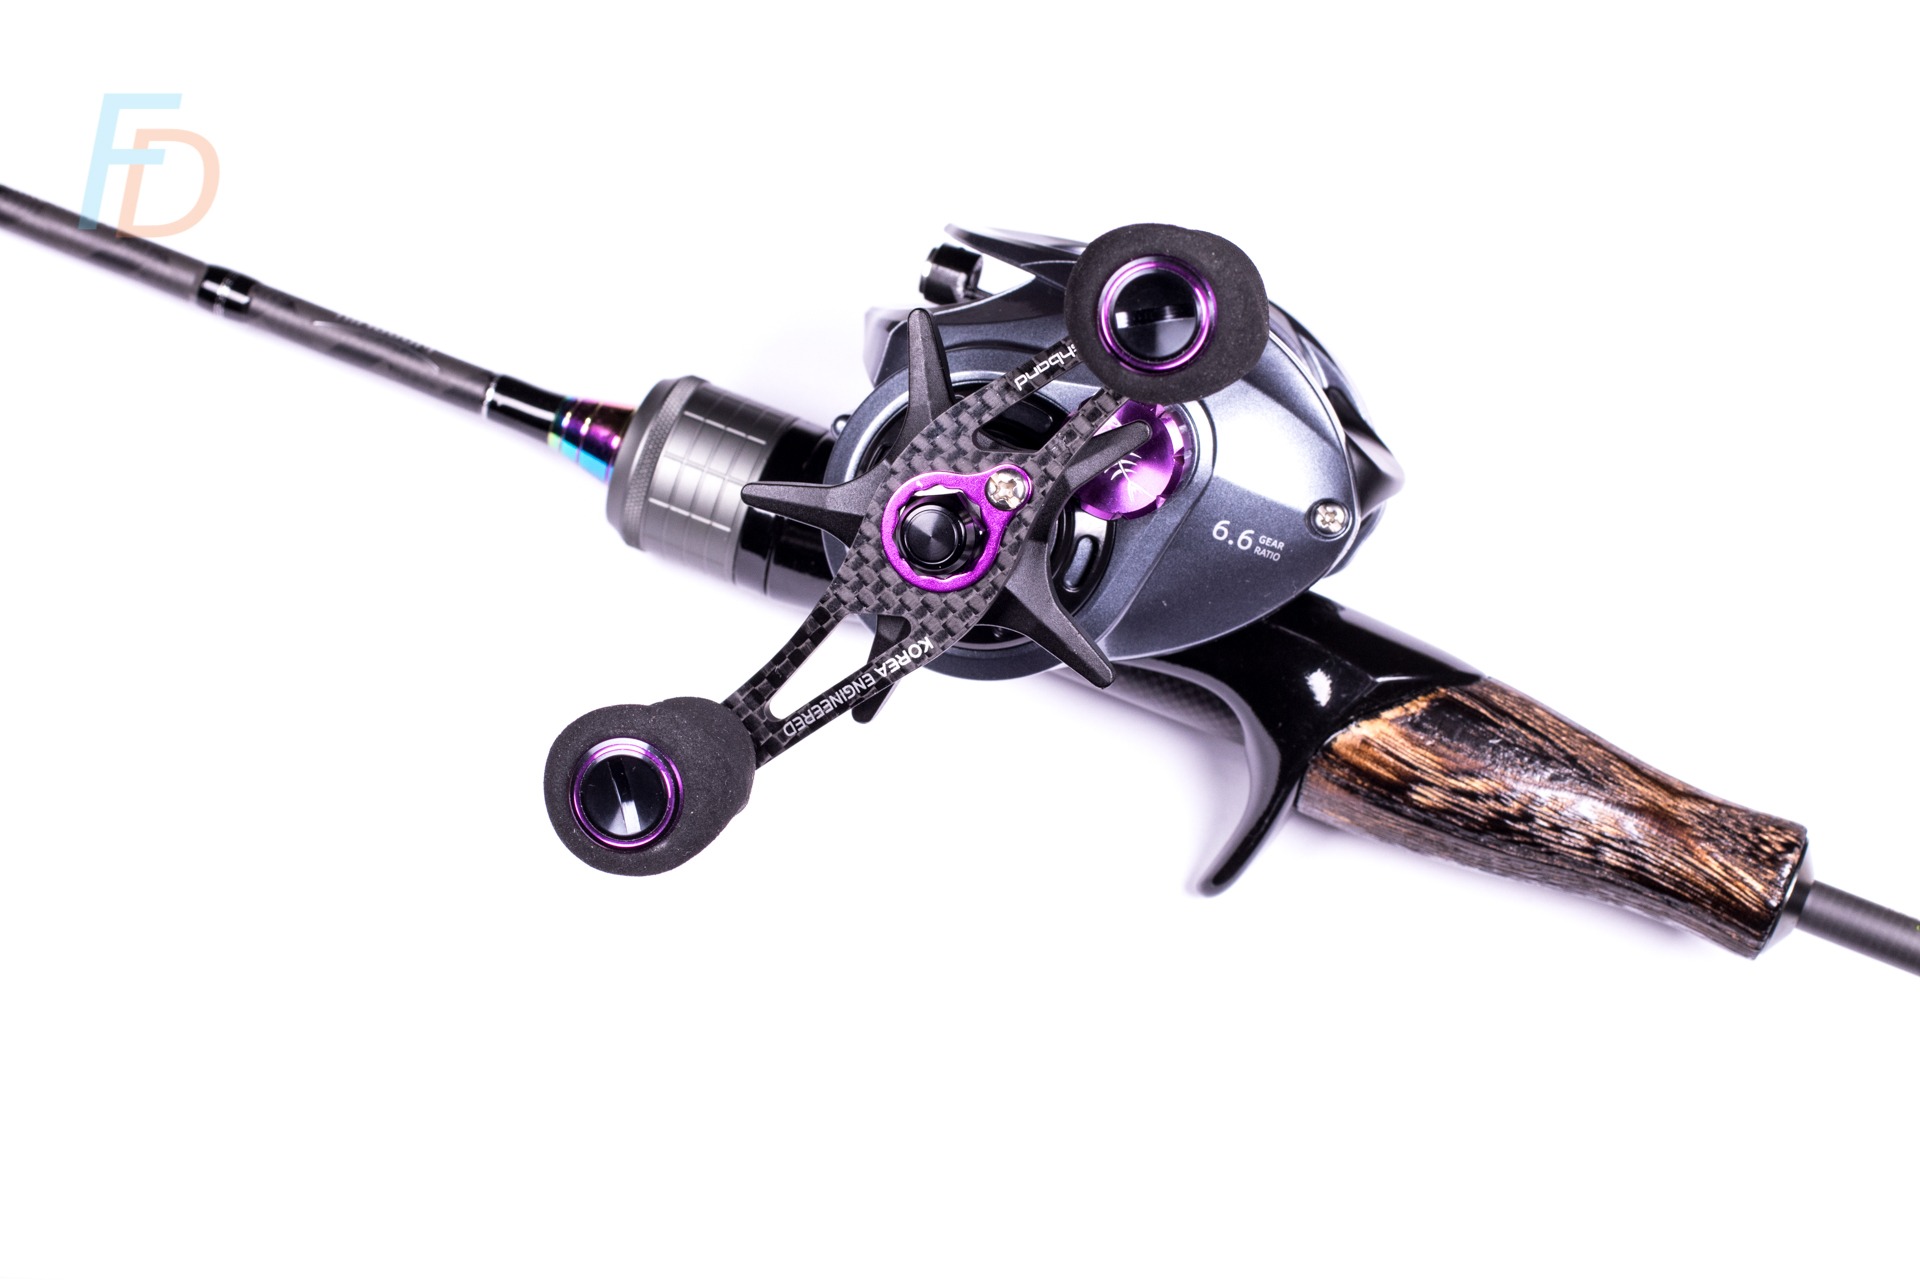 Baitcasting style rod and reel